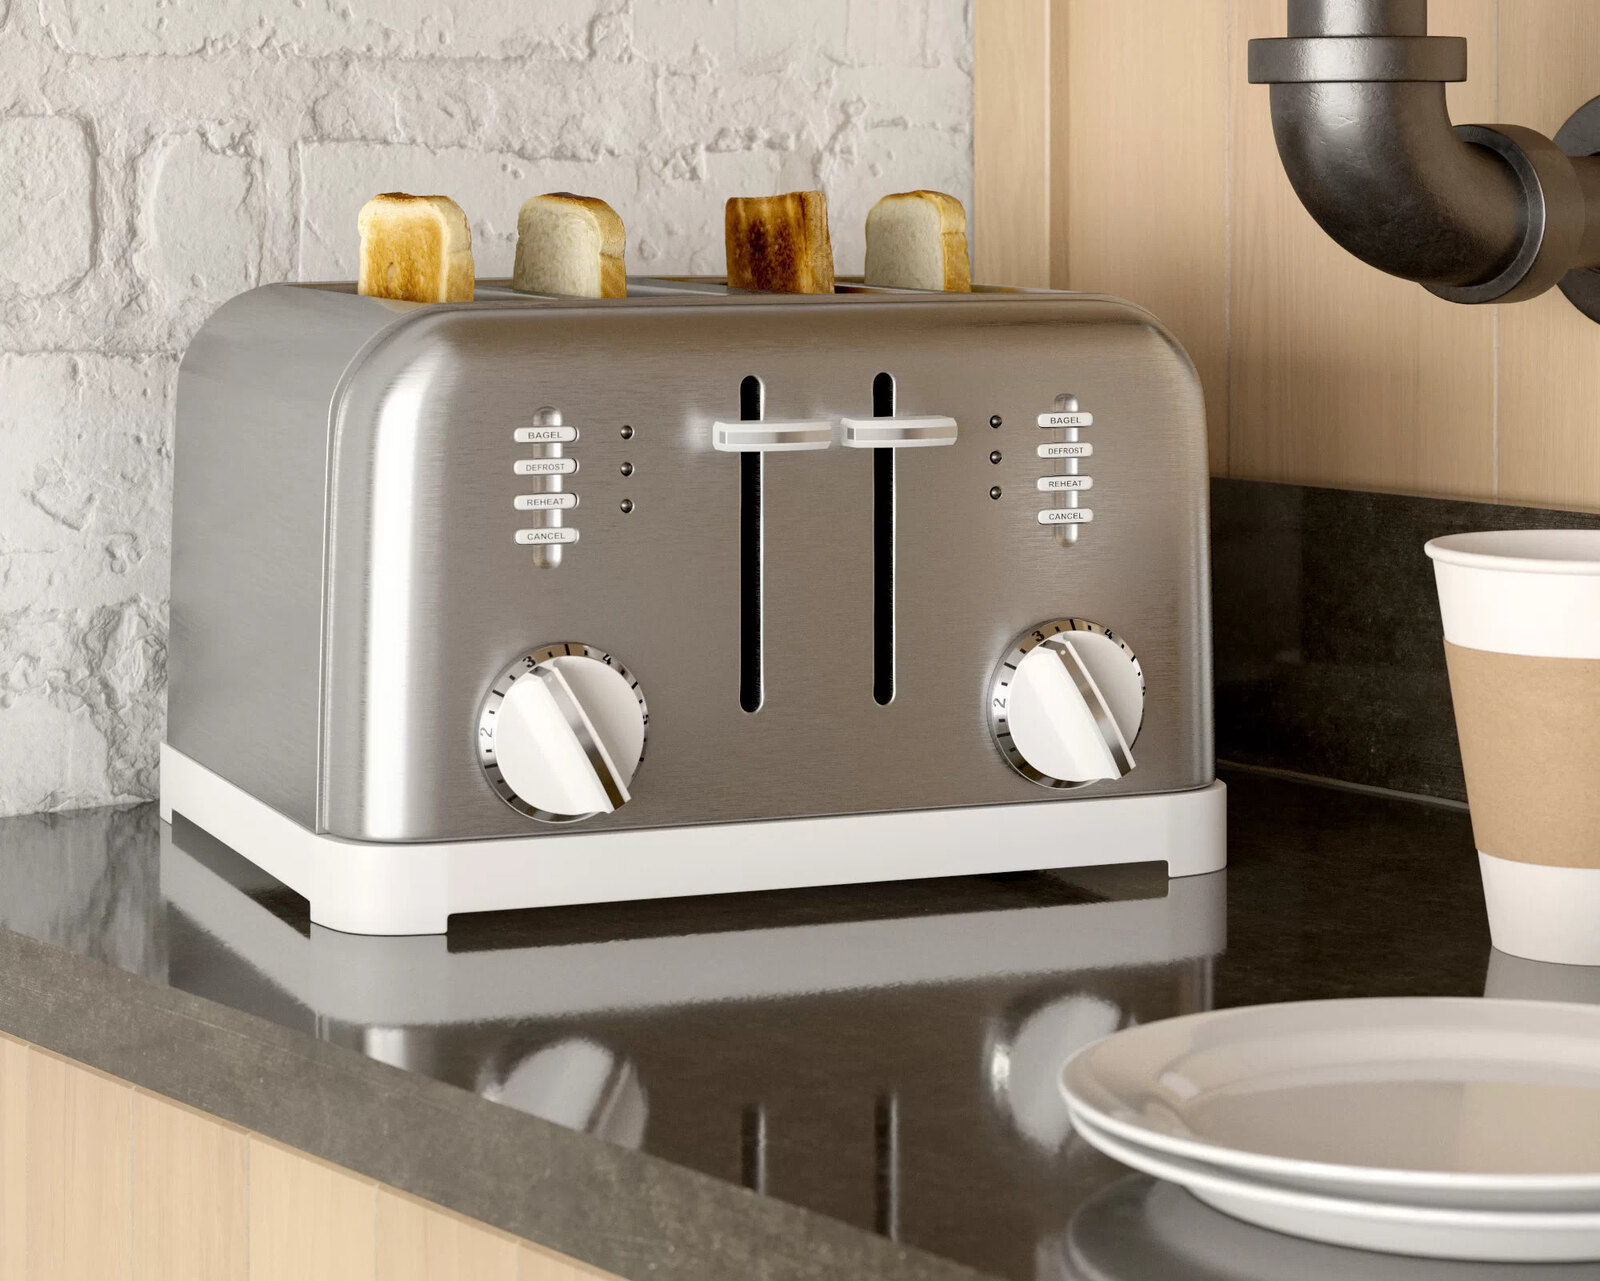 10 Best Retro Toaster For 2023 1690984253 